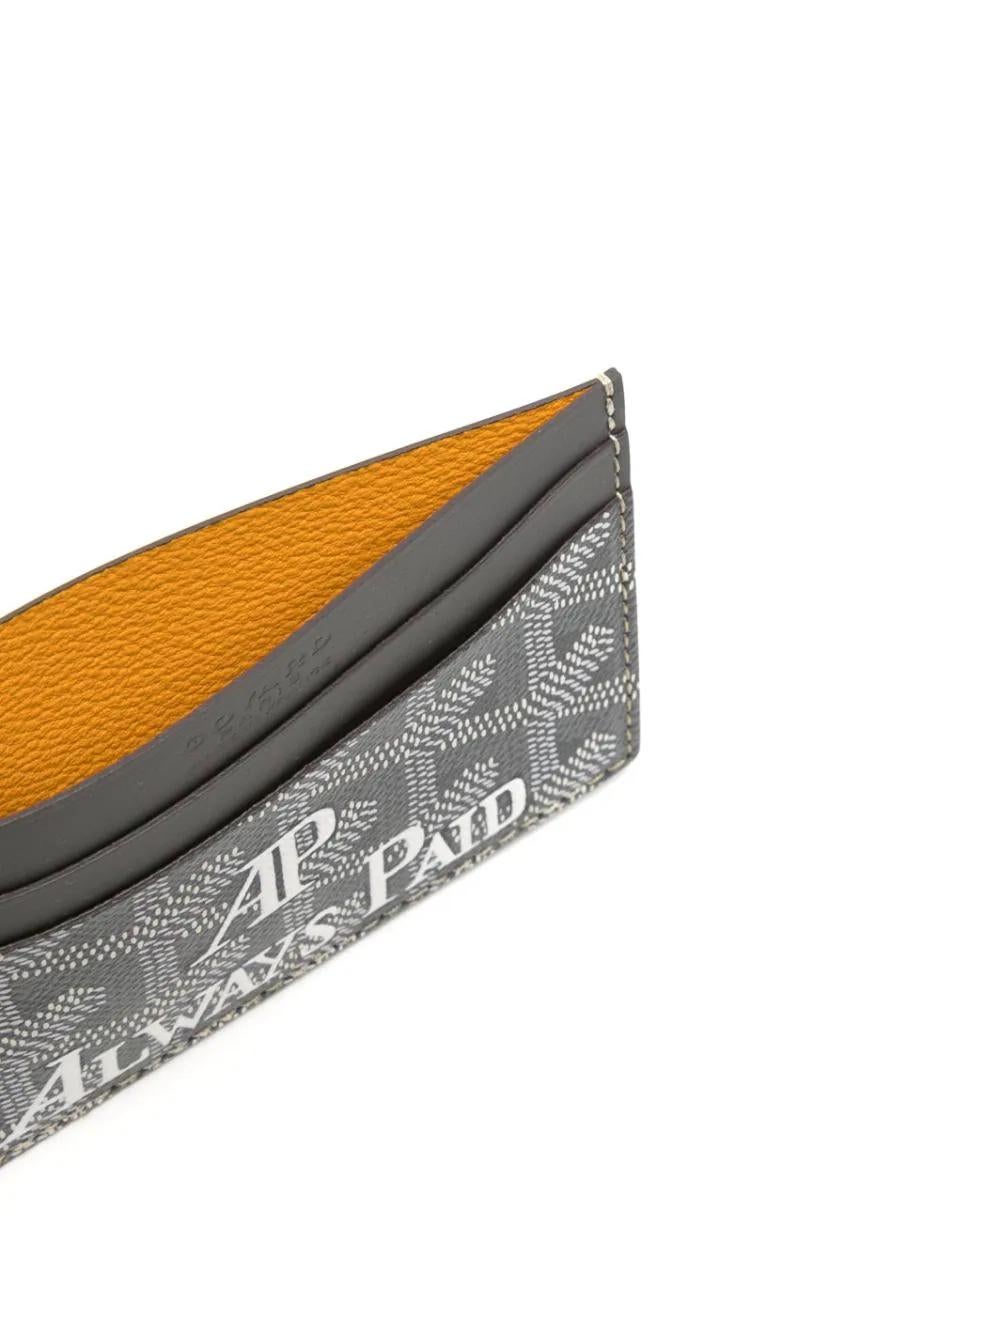 Goyard Customised Saint-Sulpice Cardholder In New Condition For Sale In London, GB